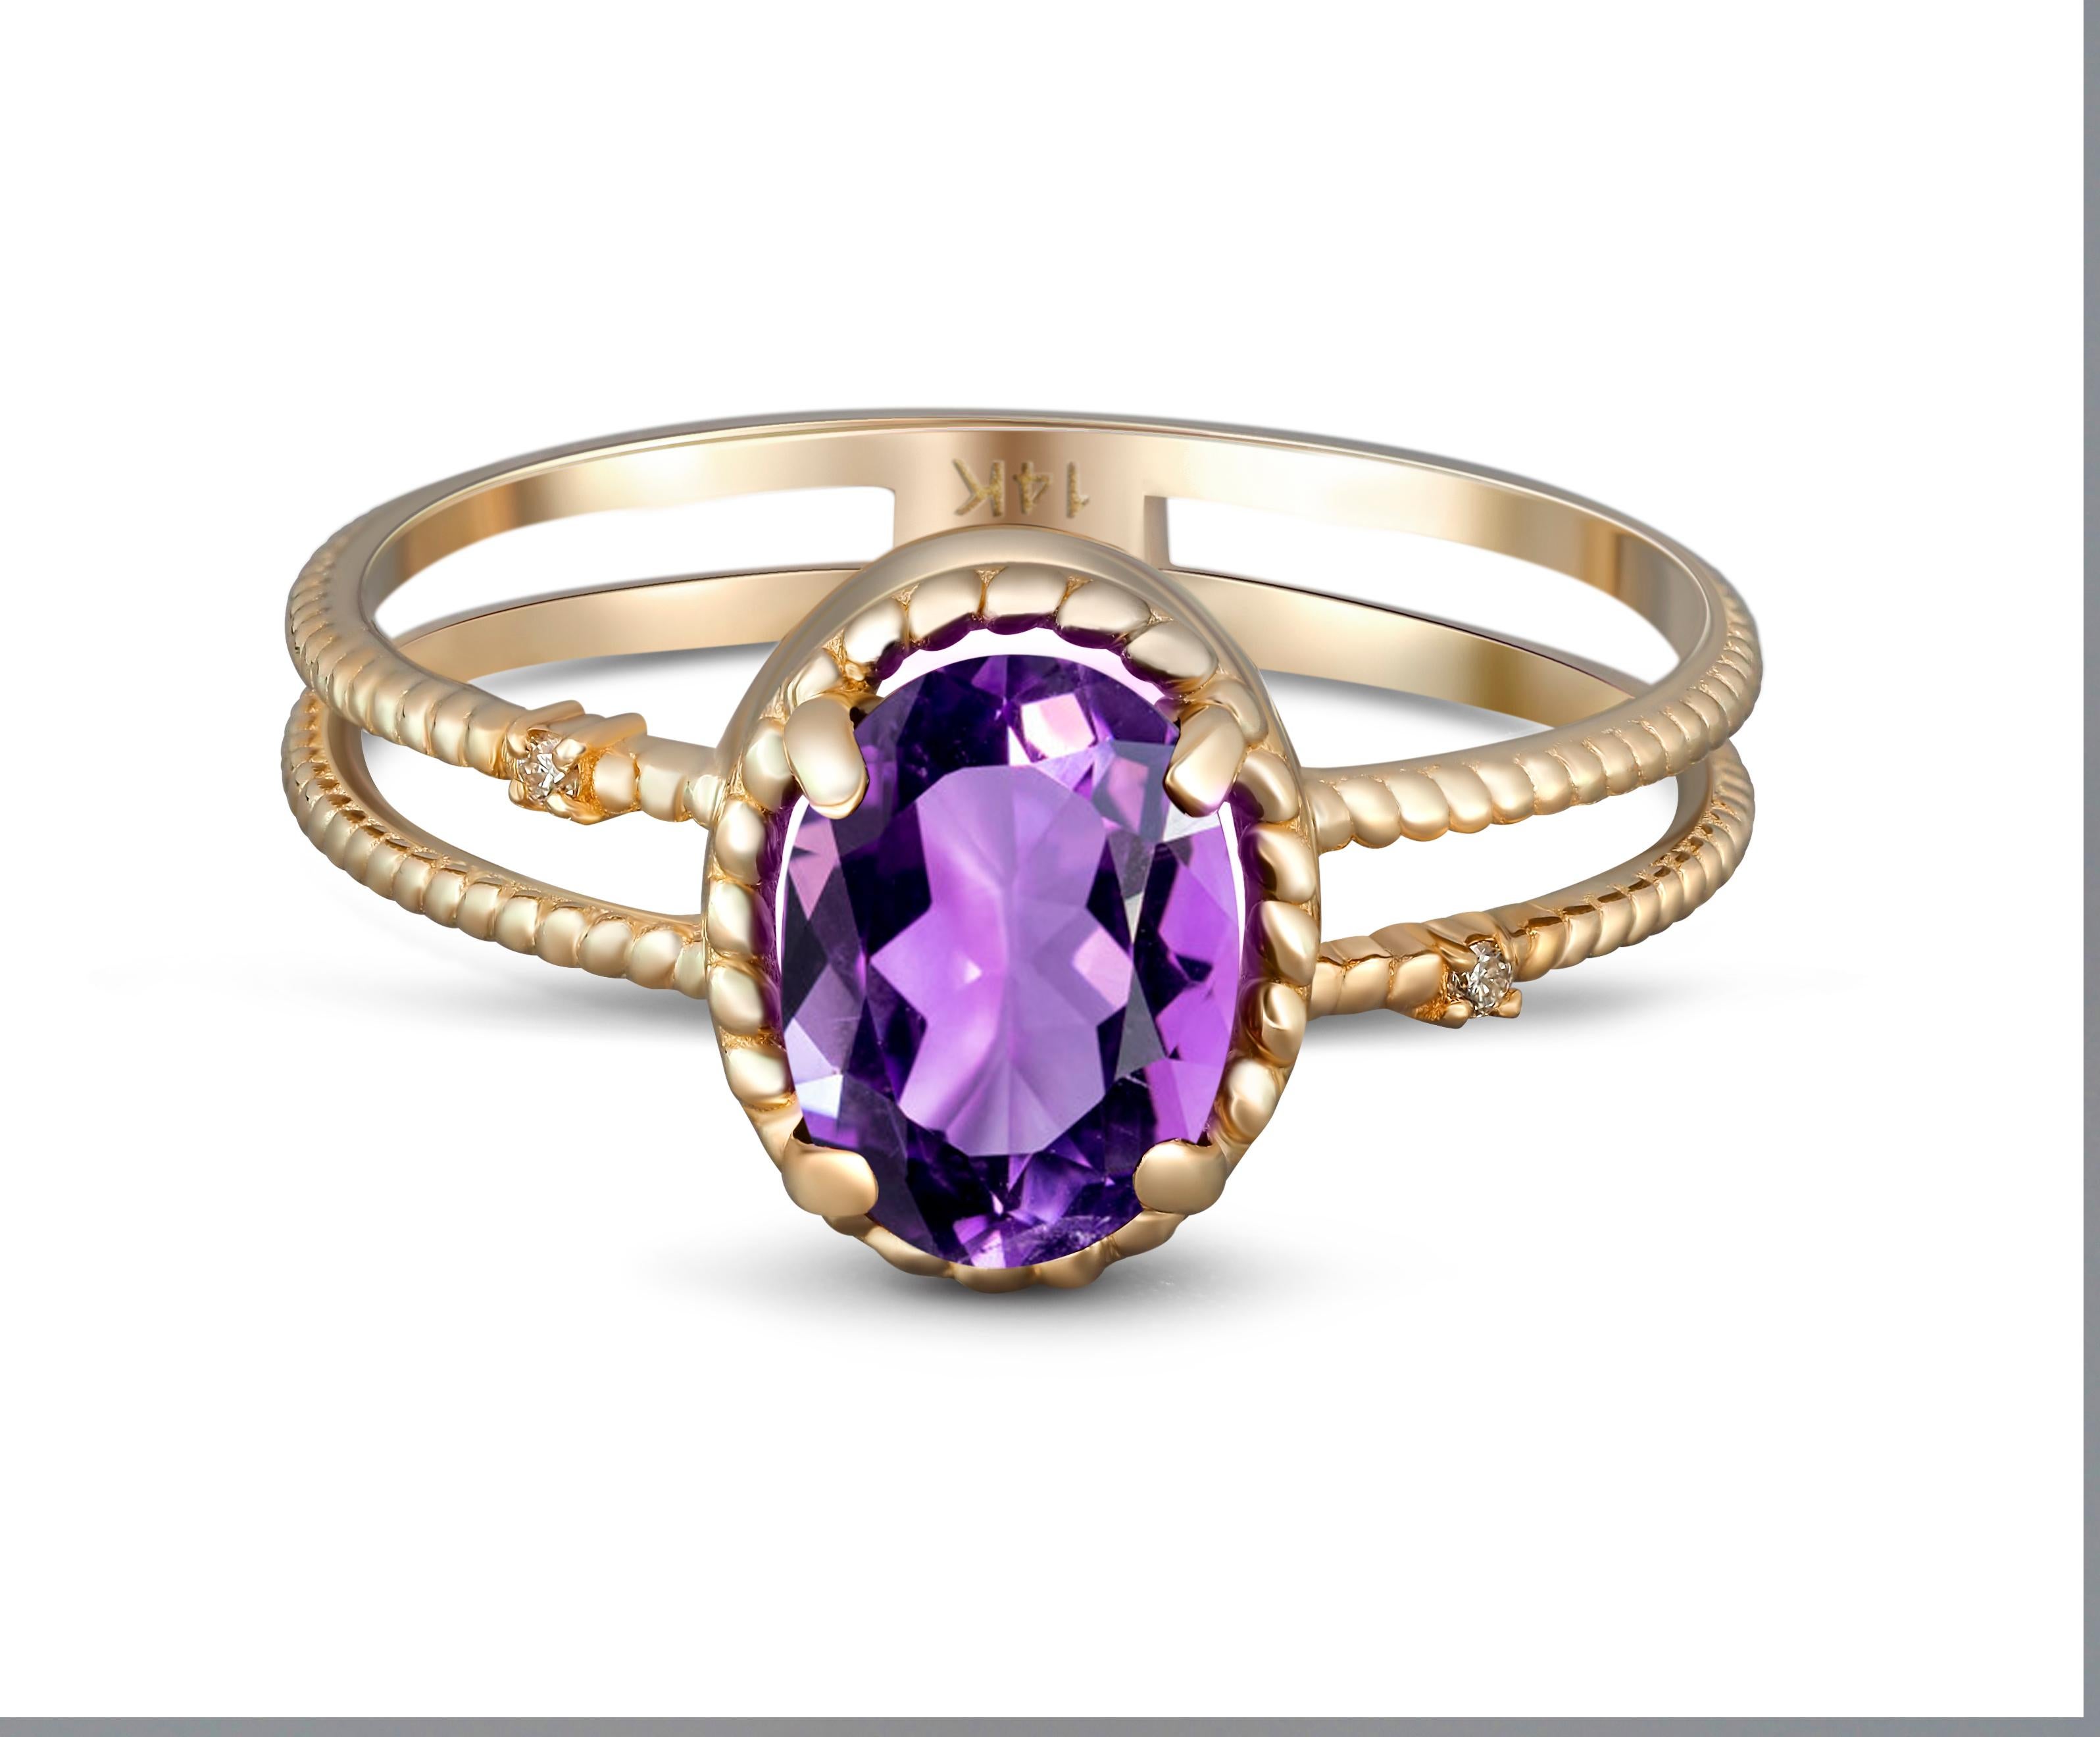 Amethyst Gold ring. Oval Amethyst Ring. 14k gold ring with Amethyst. Minimalist Amethyst Ring. Amethyst Engagement ring. Amethyst Promise ring. Amethyst Ring for woman. February Birthstone Ring. Stackable Amethyst ring. Amethyst Dainty ring.